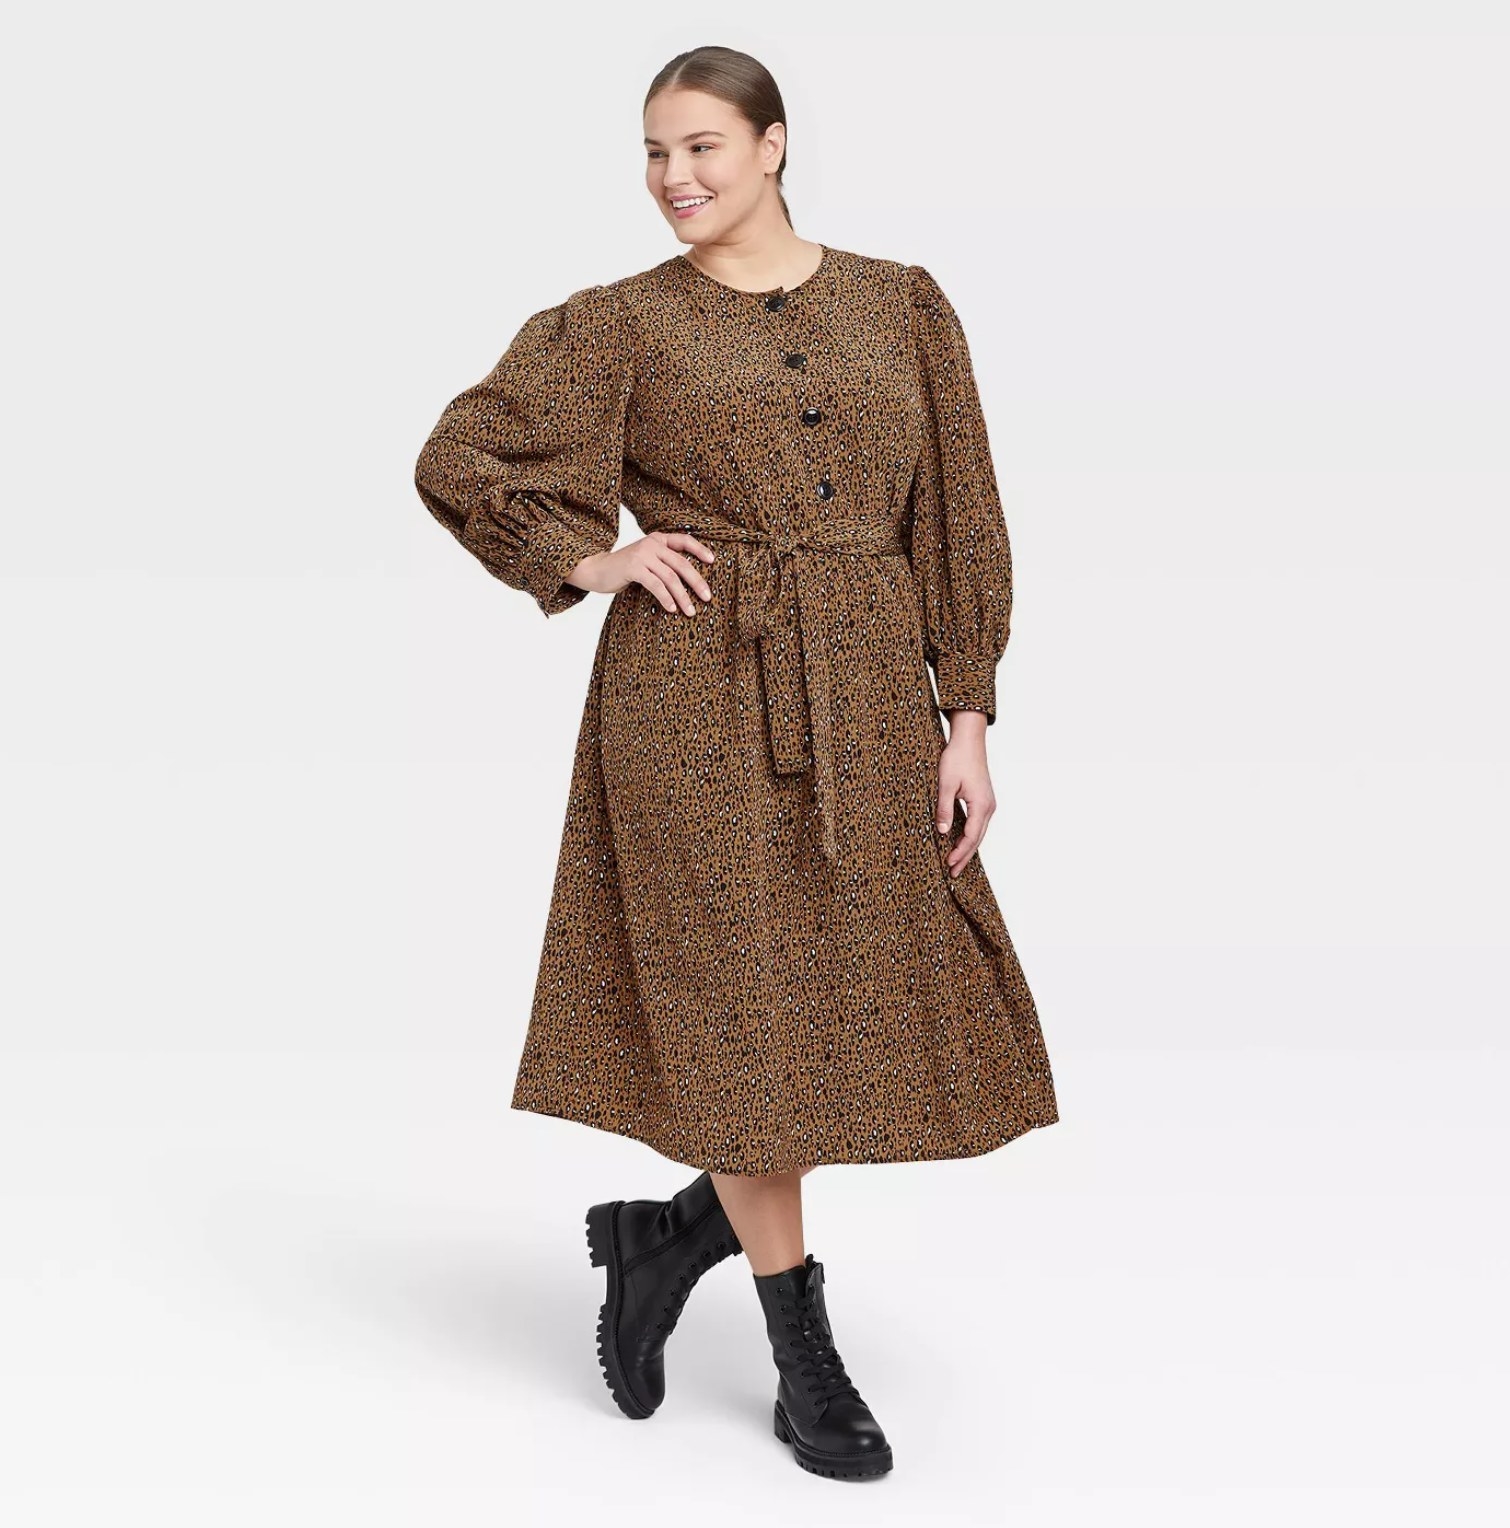 model wearing the dress in brown with black buttons and black boots